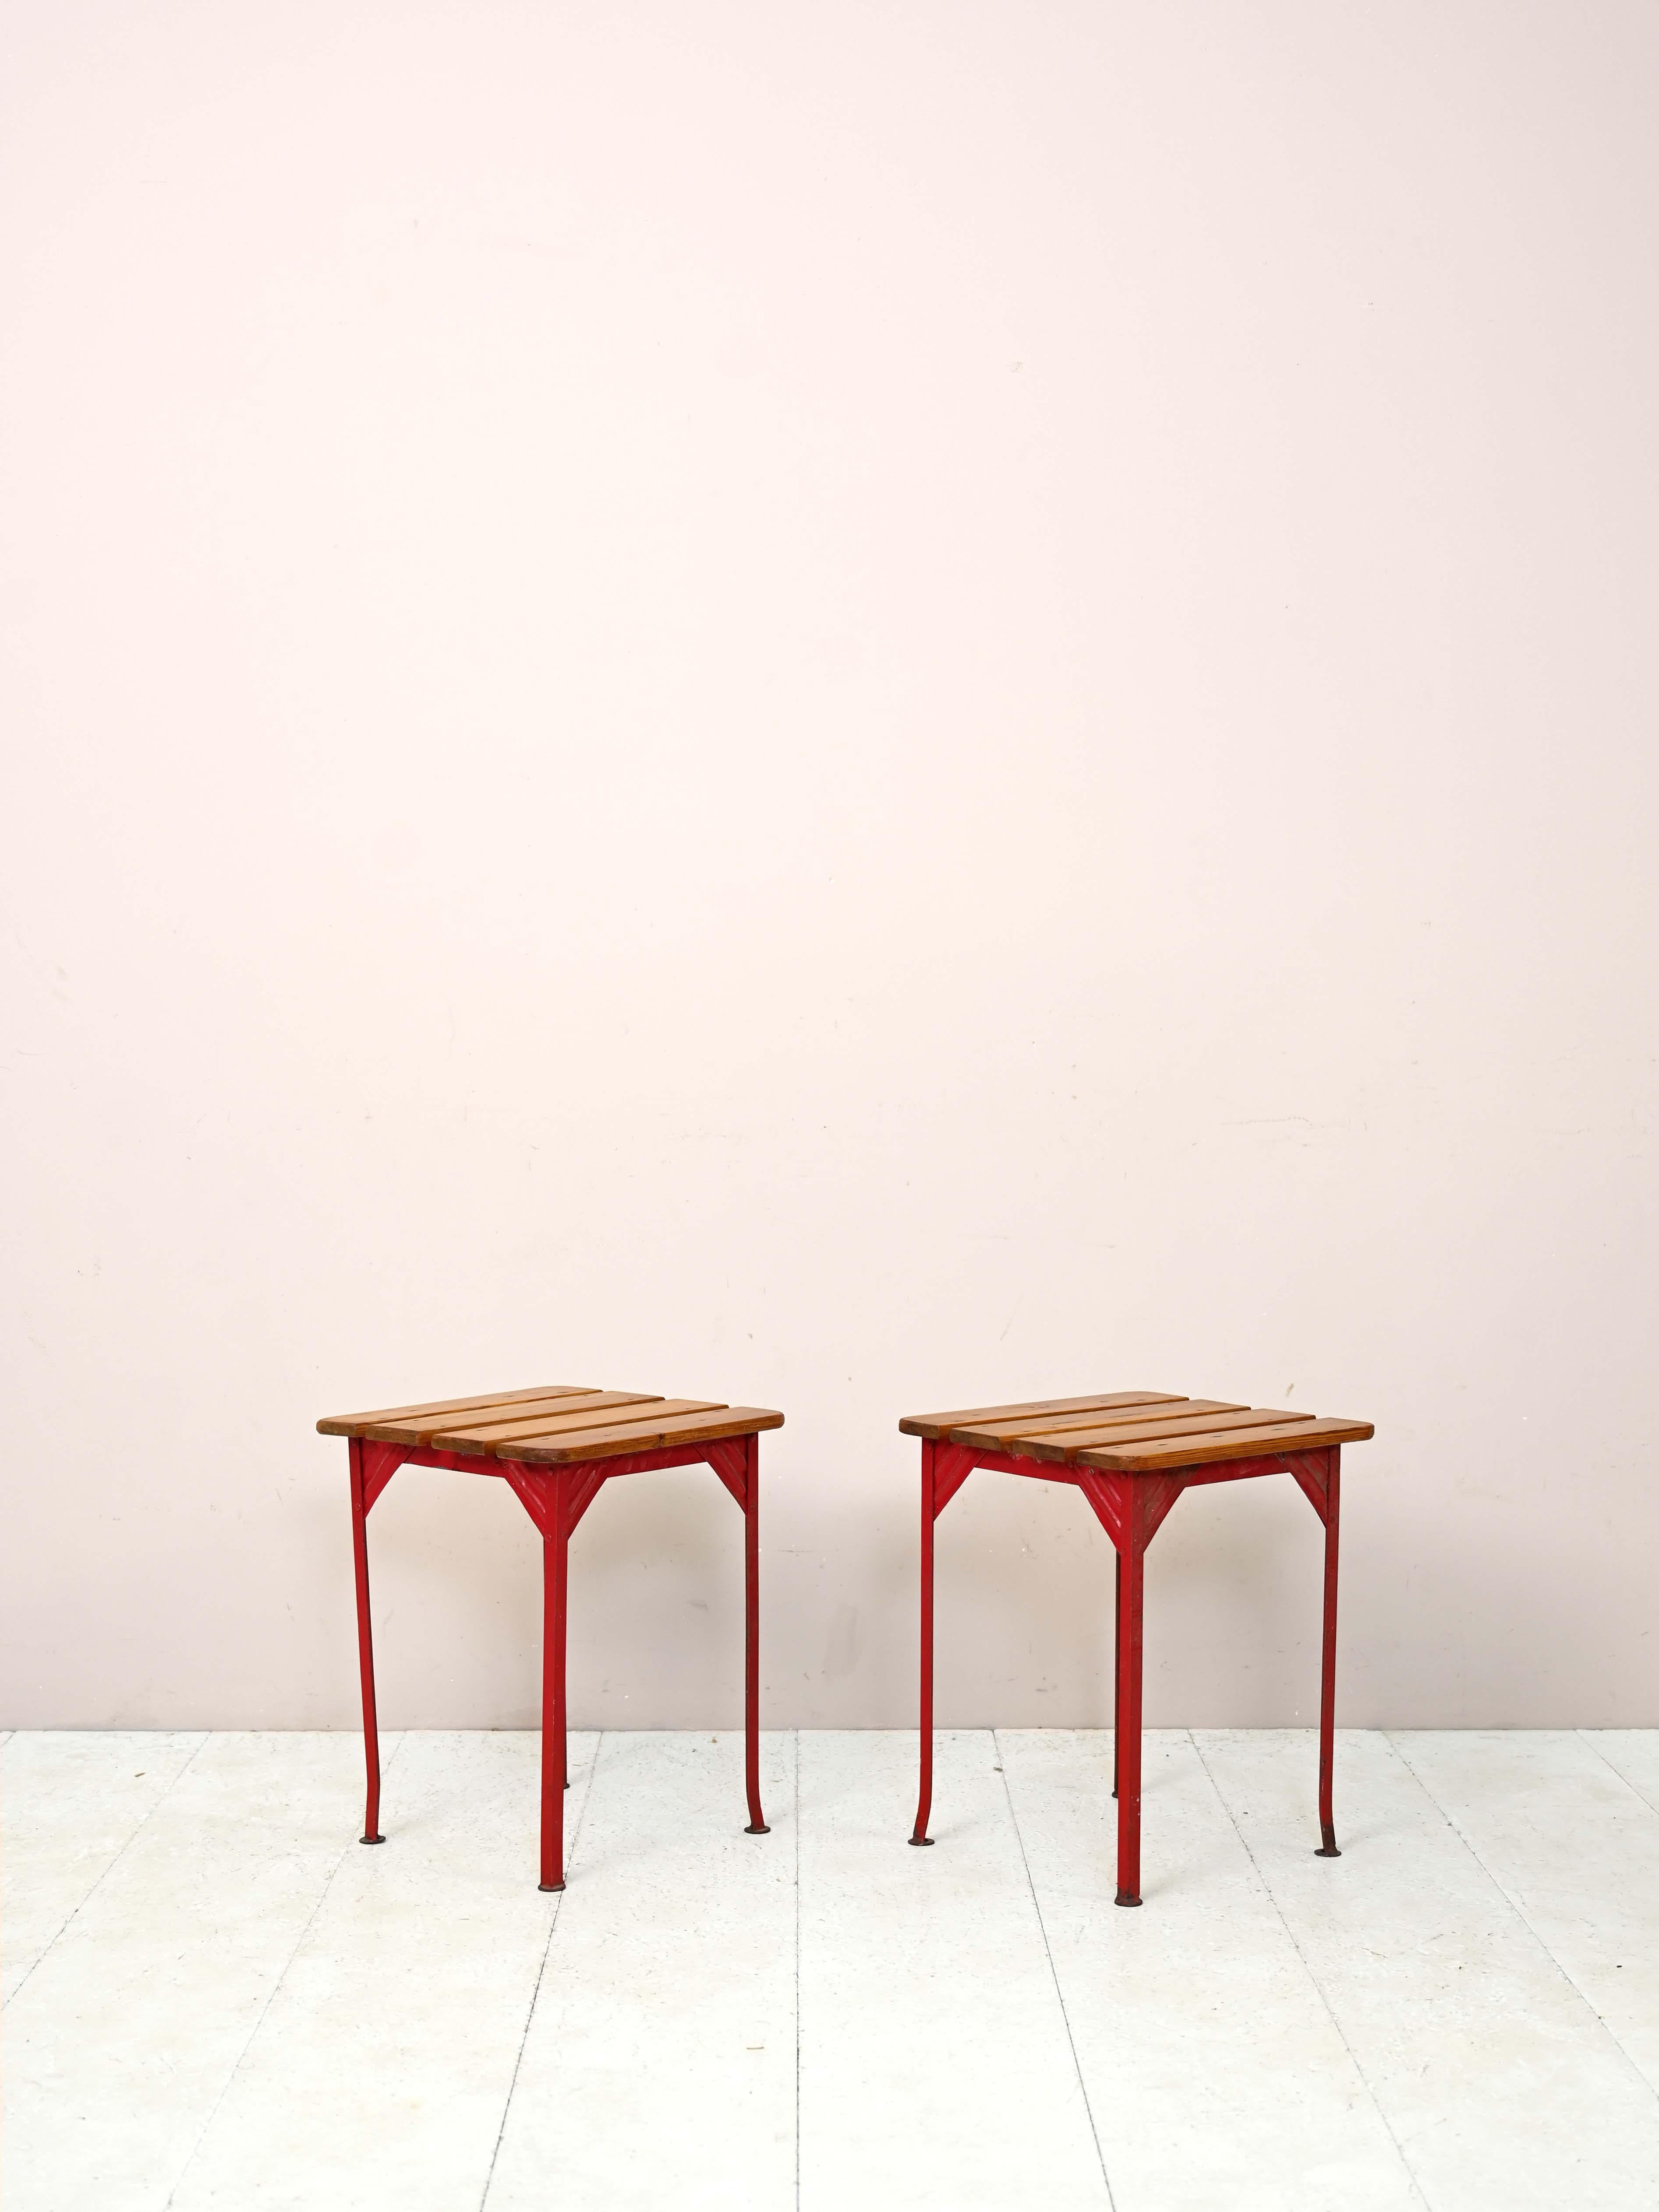 Vintage Scandinavian stools.

A pair of industrial-style stools with a red-painted metal frame and wooden slat seats.

They can also be used as tables or bedside tables to furnish in an eclectic style.

In good condition. A conservative restoration